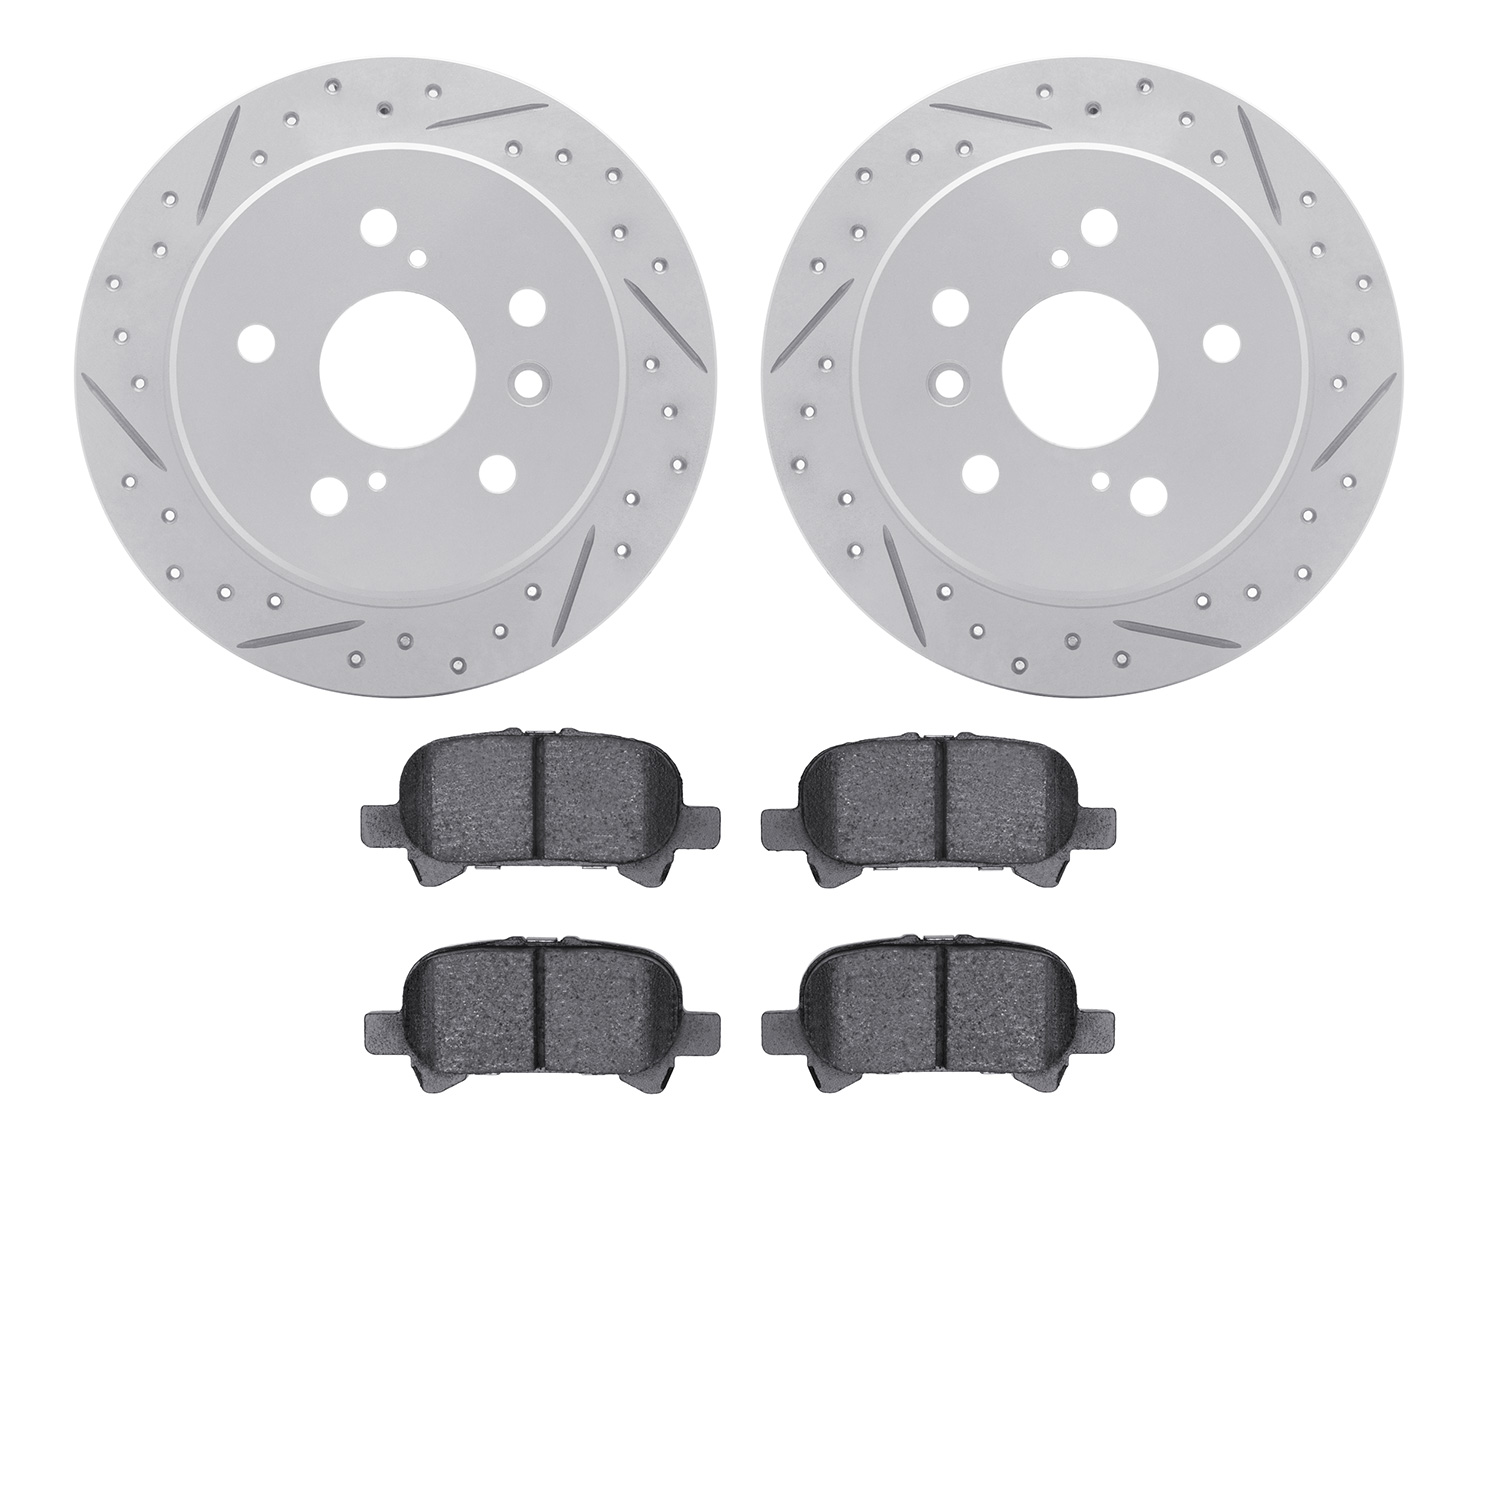 2502-76005 Geoperformance Drilled/Slotted Rotors w/5000 Advanced Brake Pads Kit, 2000-2003 Lexus/Toyota/Scion, Position: Rear